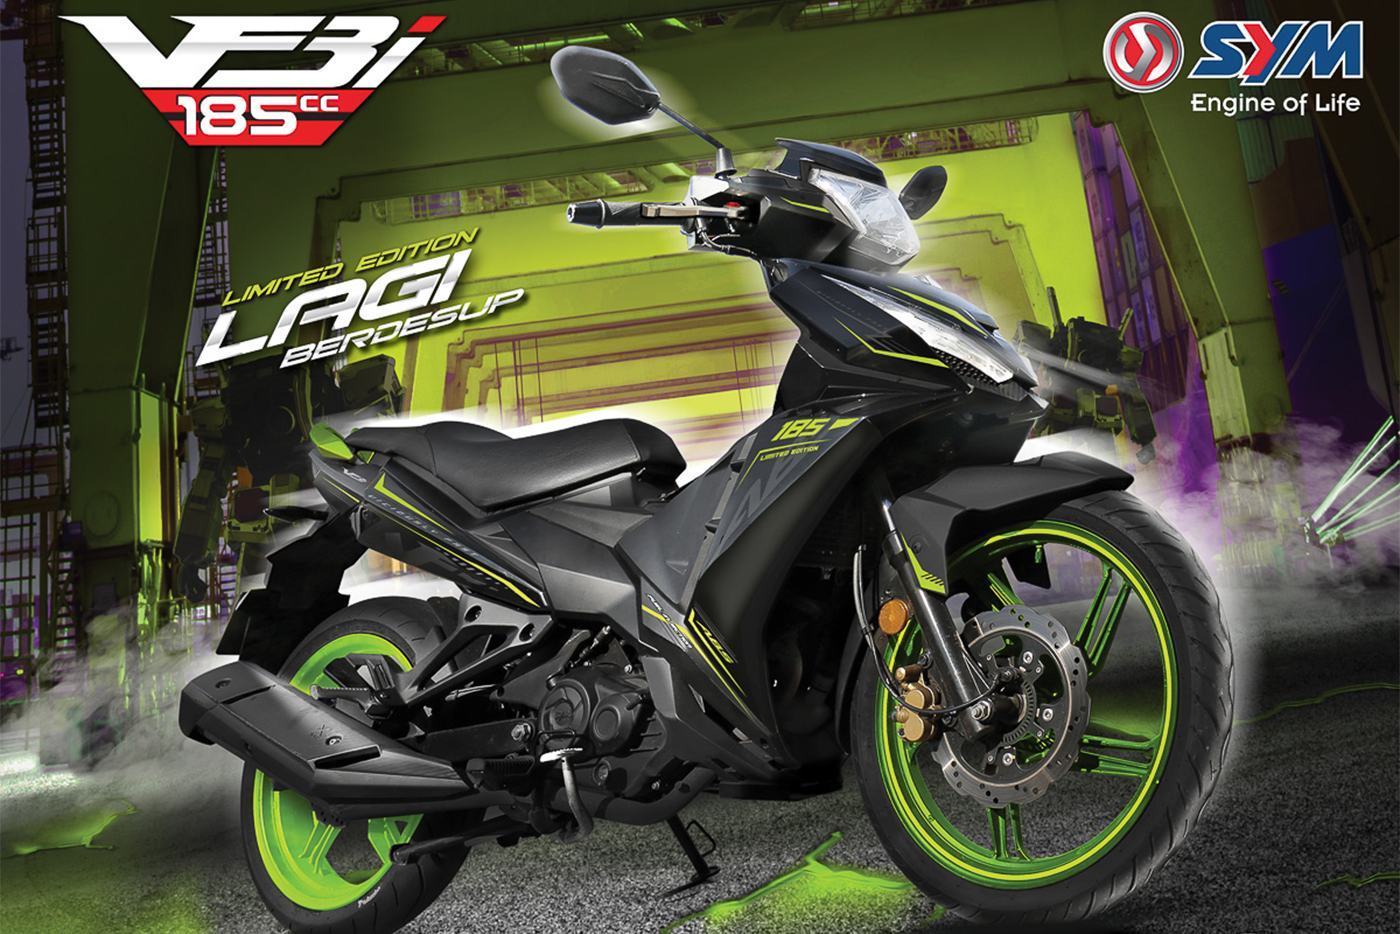 2020 sym vf3i limited edition le launch price malaysia 185cc super moped 7